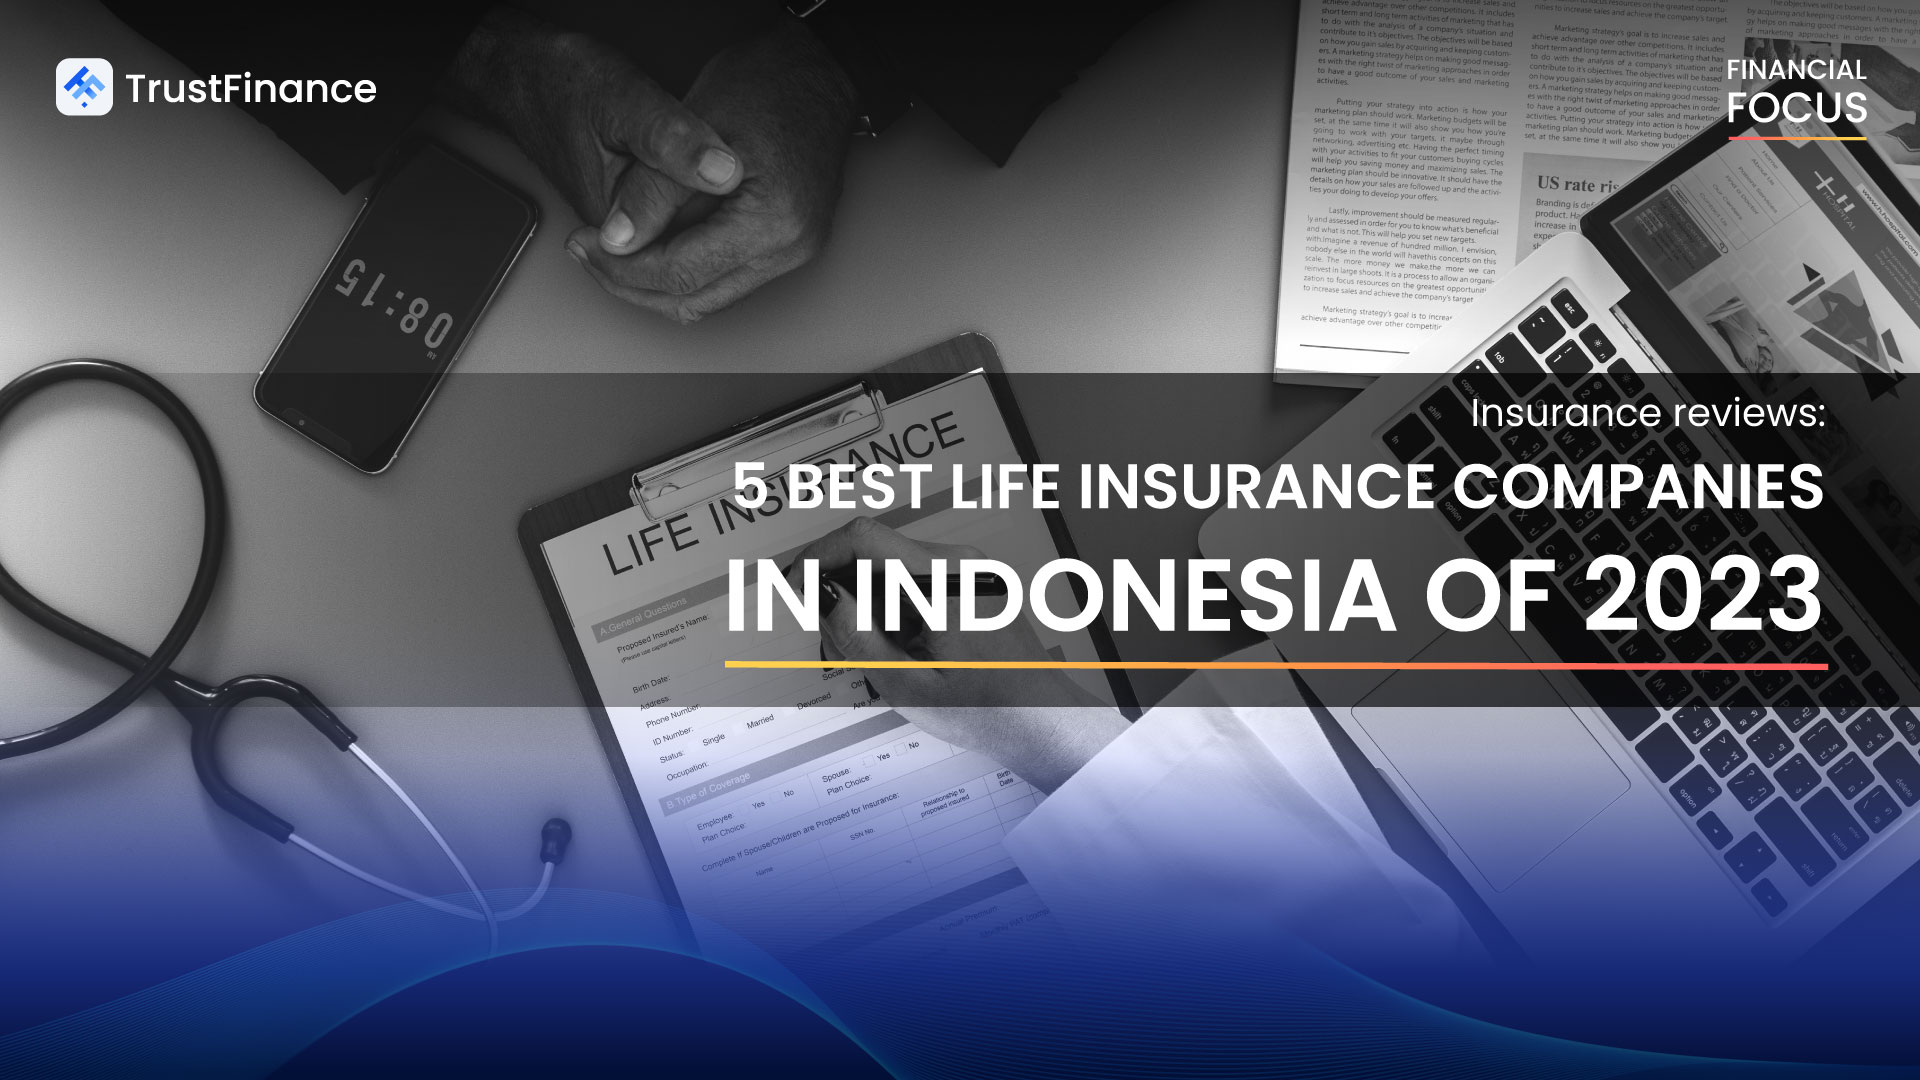 Insurance review: 5 Best Life Insurance Companies In Indonesia Of 2023